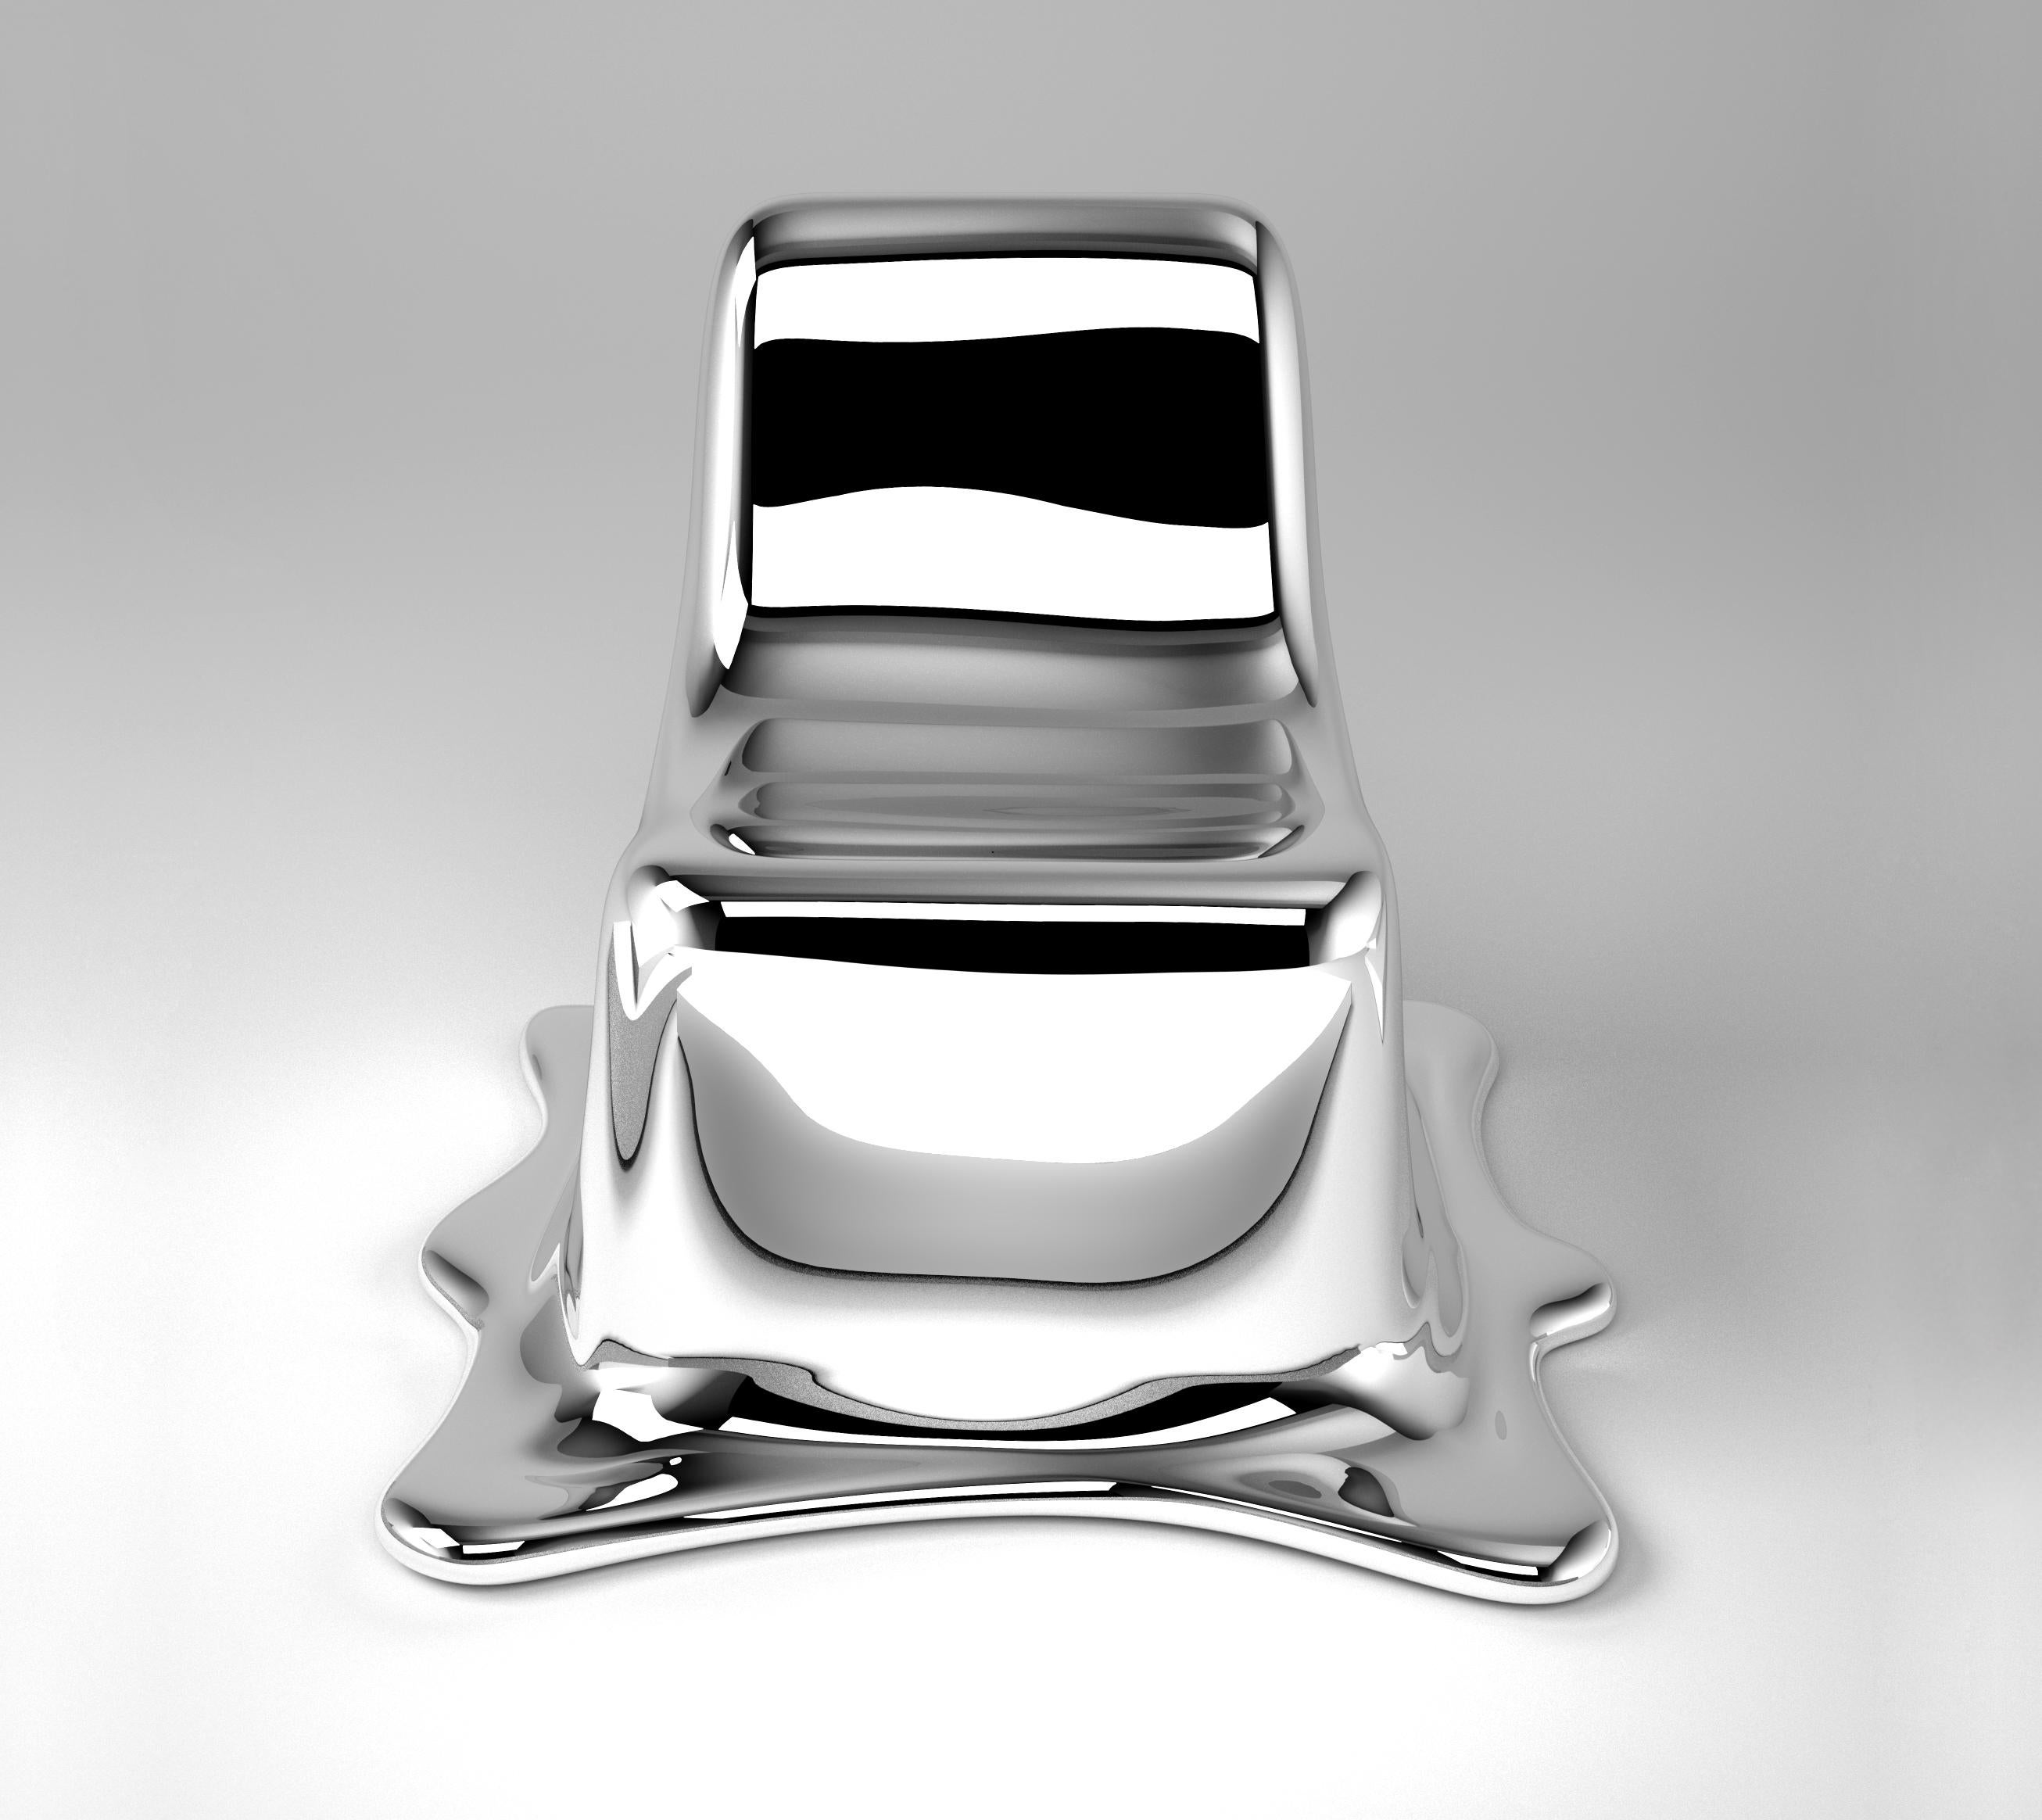 Melting chair by Philipp Aduatz
2011
Edition of 12 + 3 A/P
Dimensions: 95 x 93 x 78 cm
Materials: Glass fibre reinforced polymer with a special silver coating

New since 2012: special black chrome edition of 12 + 3 A/P

Philipp Aduatz´